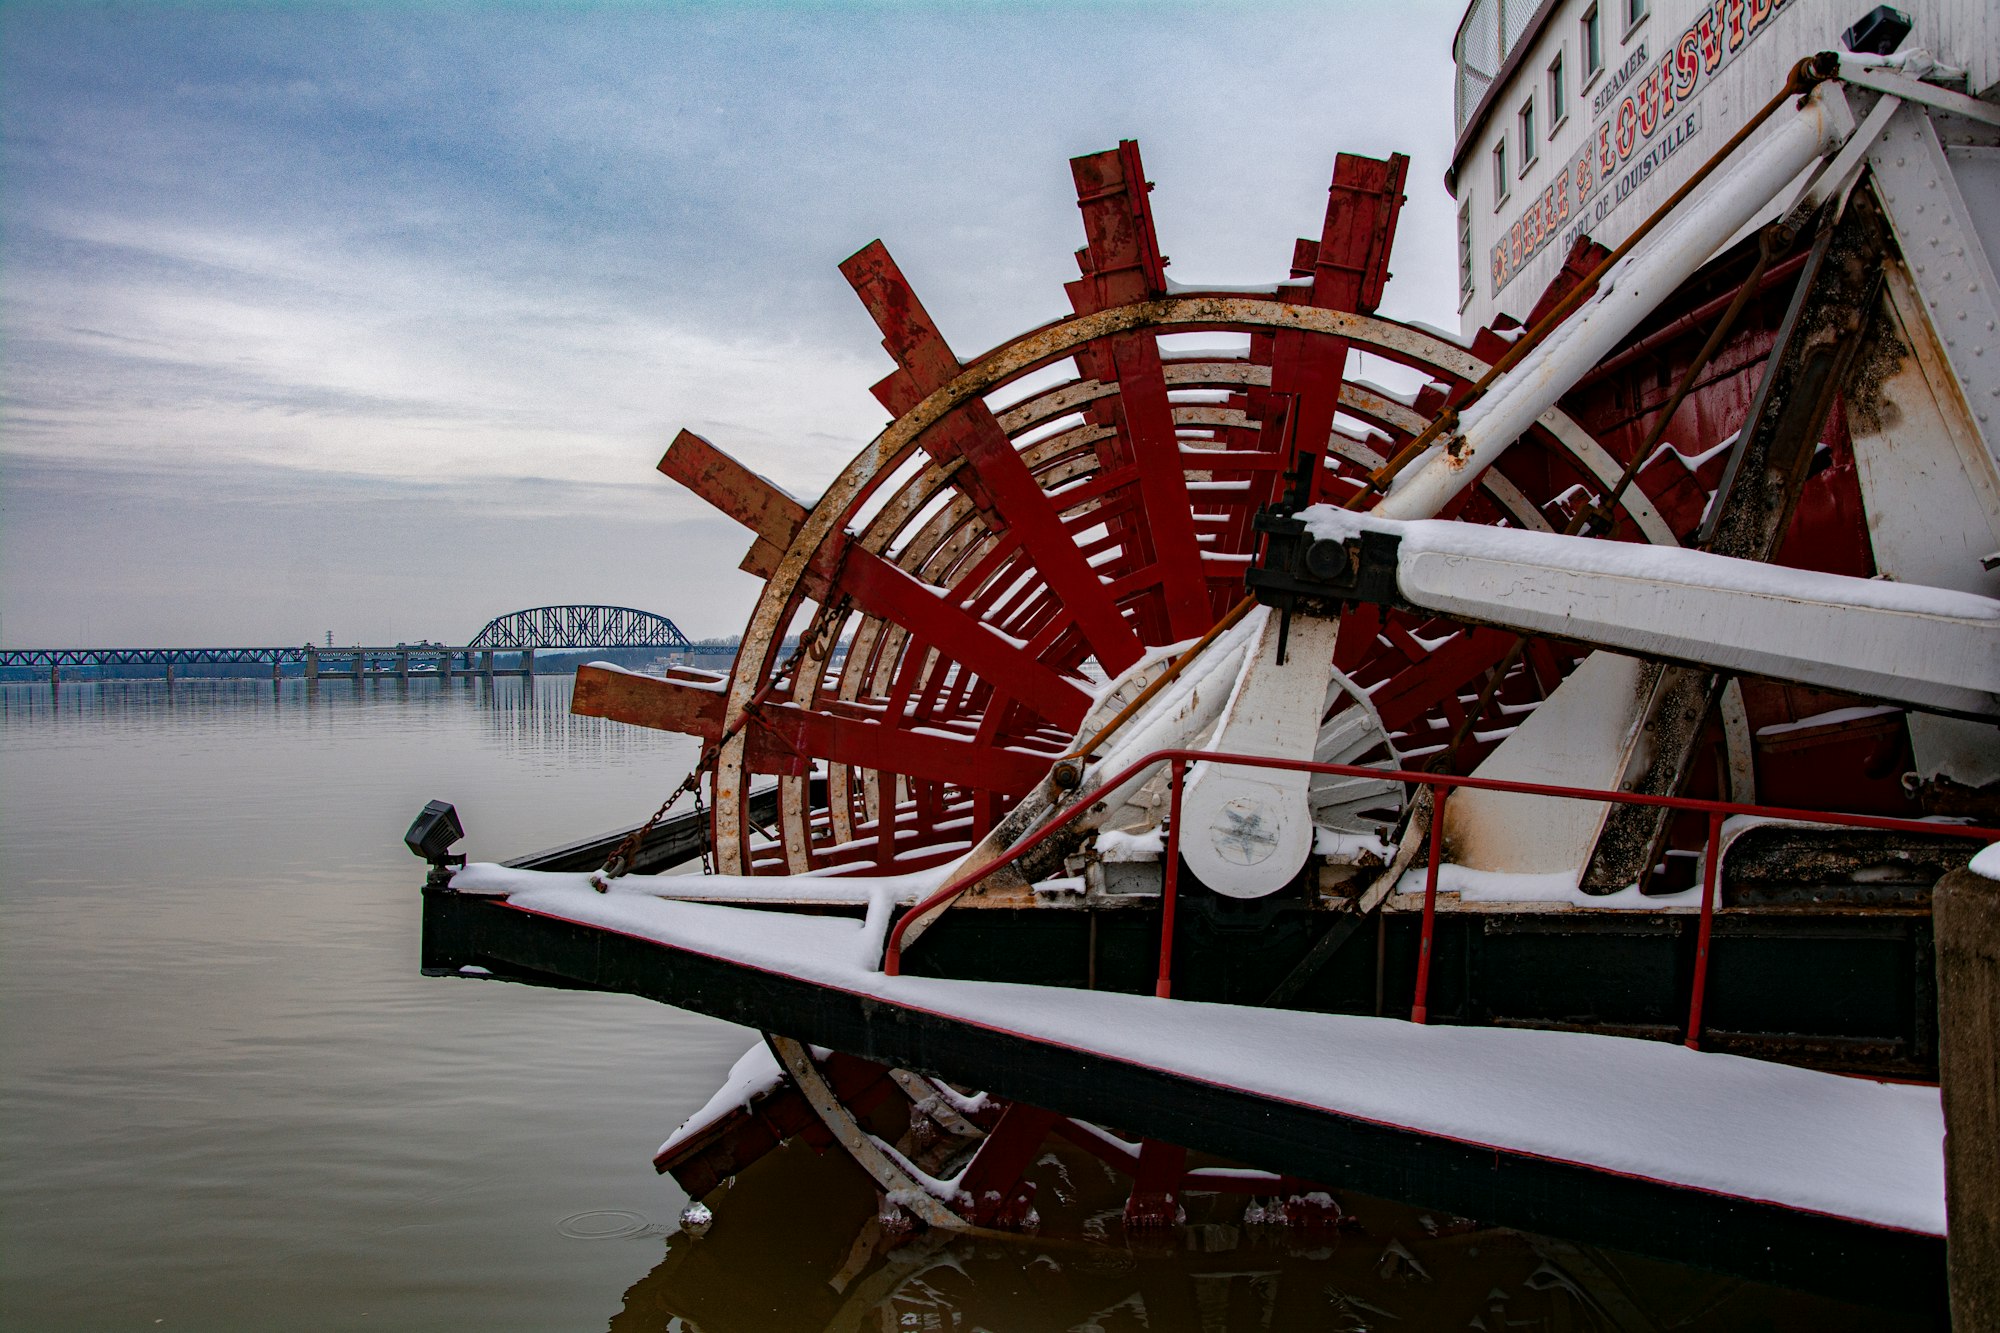 What Was The Name Of The First Commercial Steamboat In The U.S.?